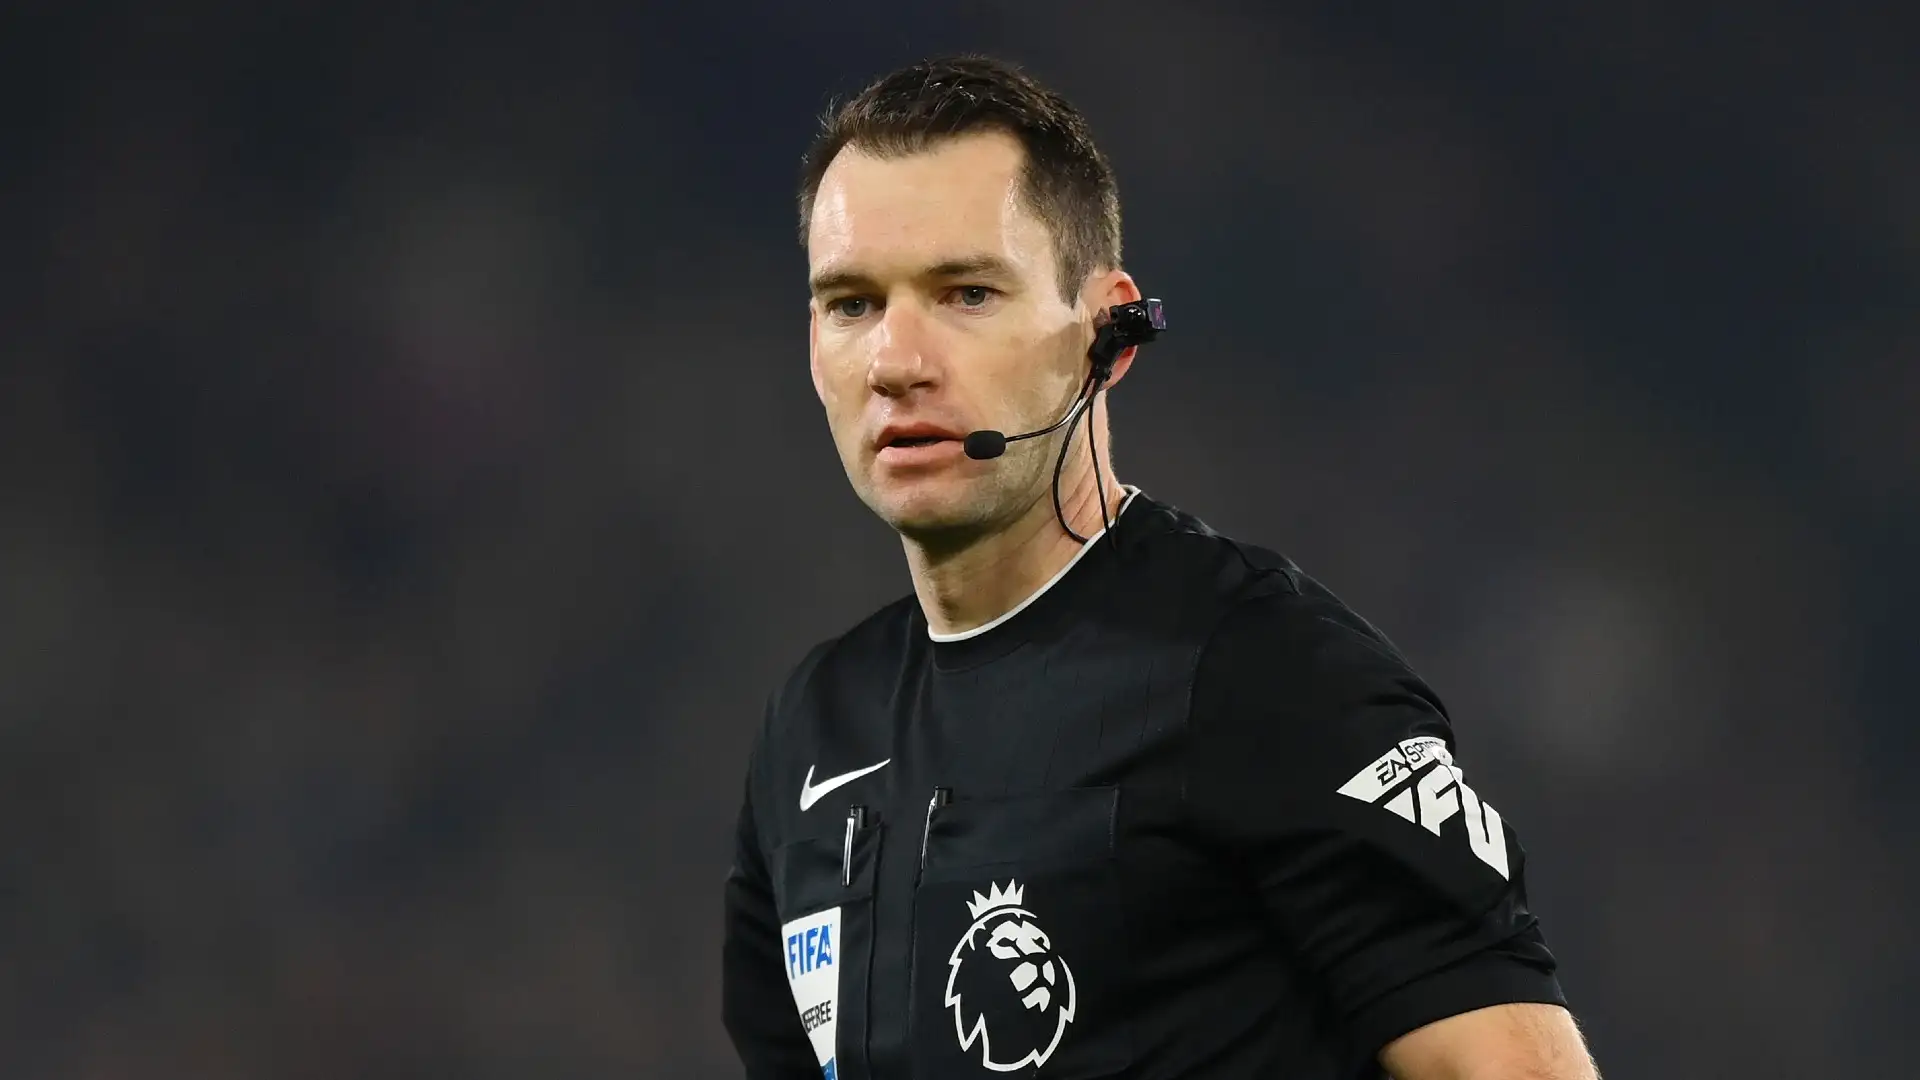 VIDEO: 'RefCam' gives fascinating insight into referee Jarred Gillett's point of view of Man Utd thrashing by Crystal Palace in Premier League first